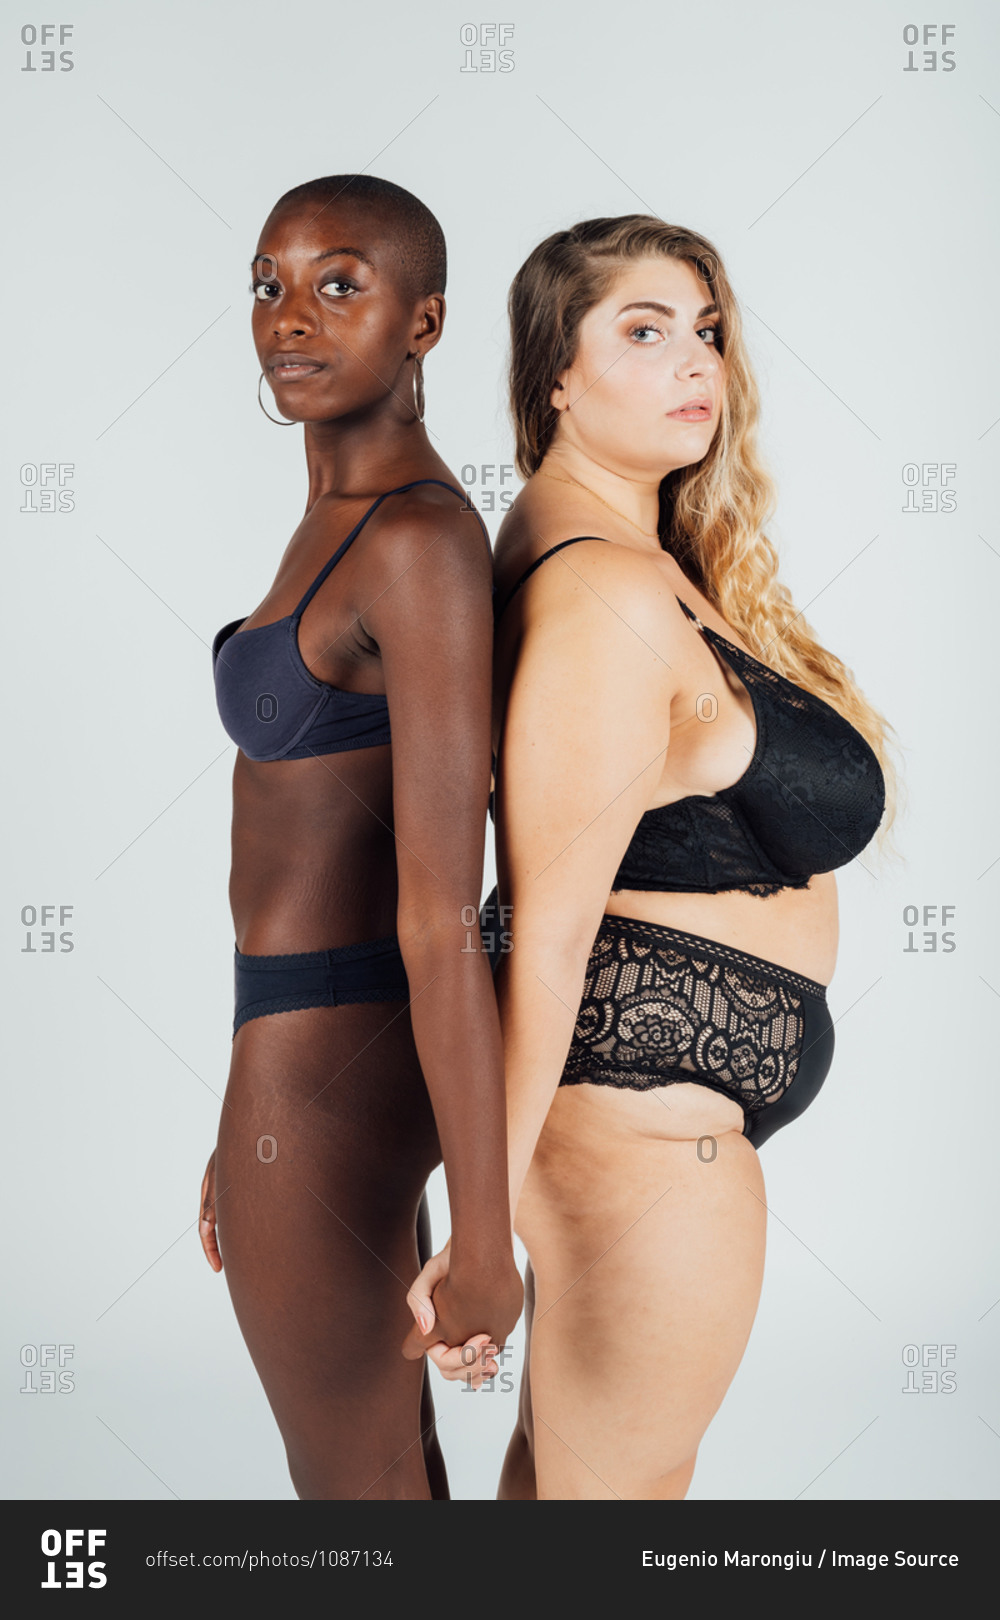 Female couple, standing back to back in underwear stock photo - OFFSET